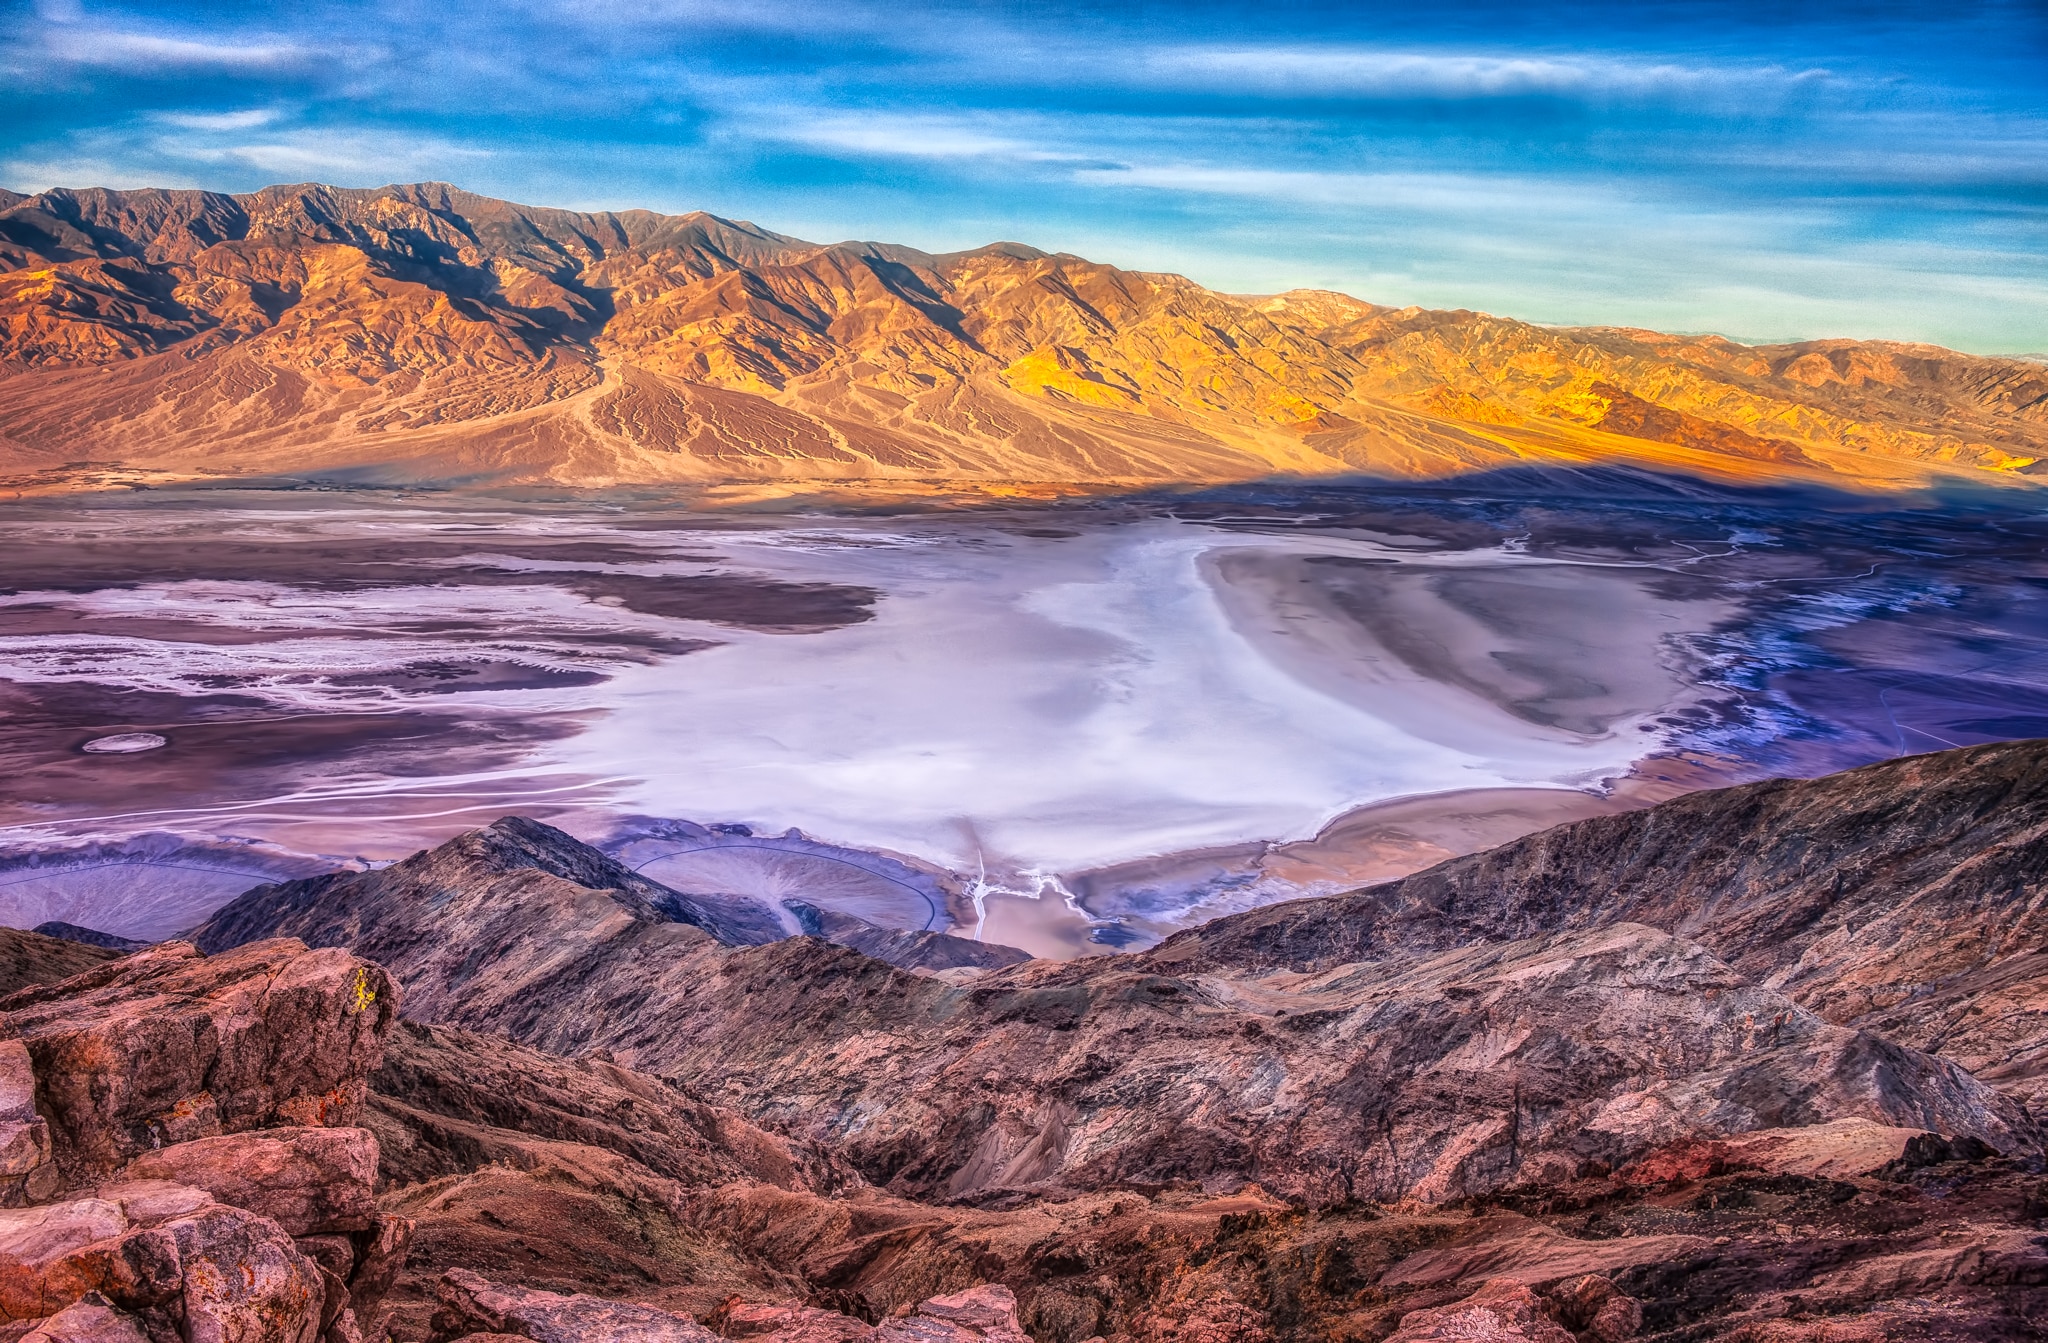 A view of Badwater Basin and the Panamint Mountains in the distance from Dante's View, in the Black Mountains, 13 miles southwest of Highway 190 in Death Valley National Park, California. Notice the alluvial fans in the lower left quadrant.